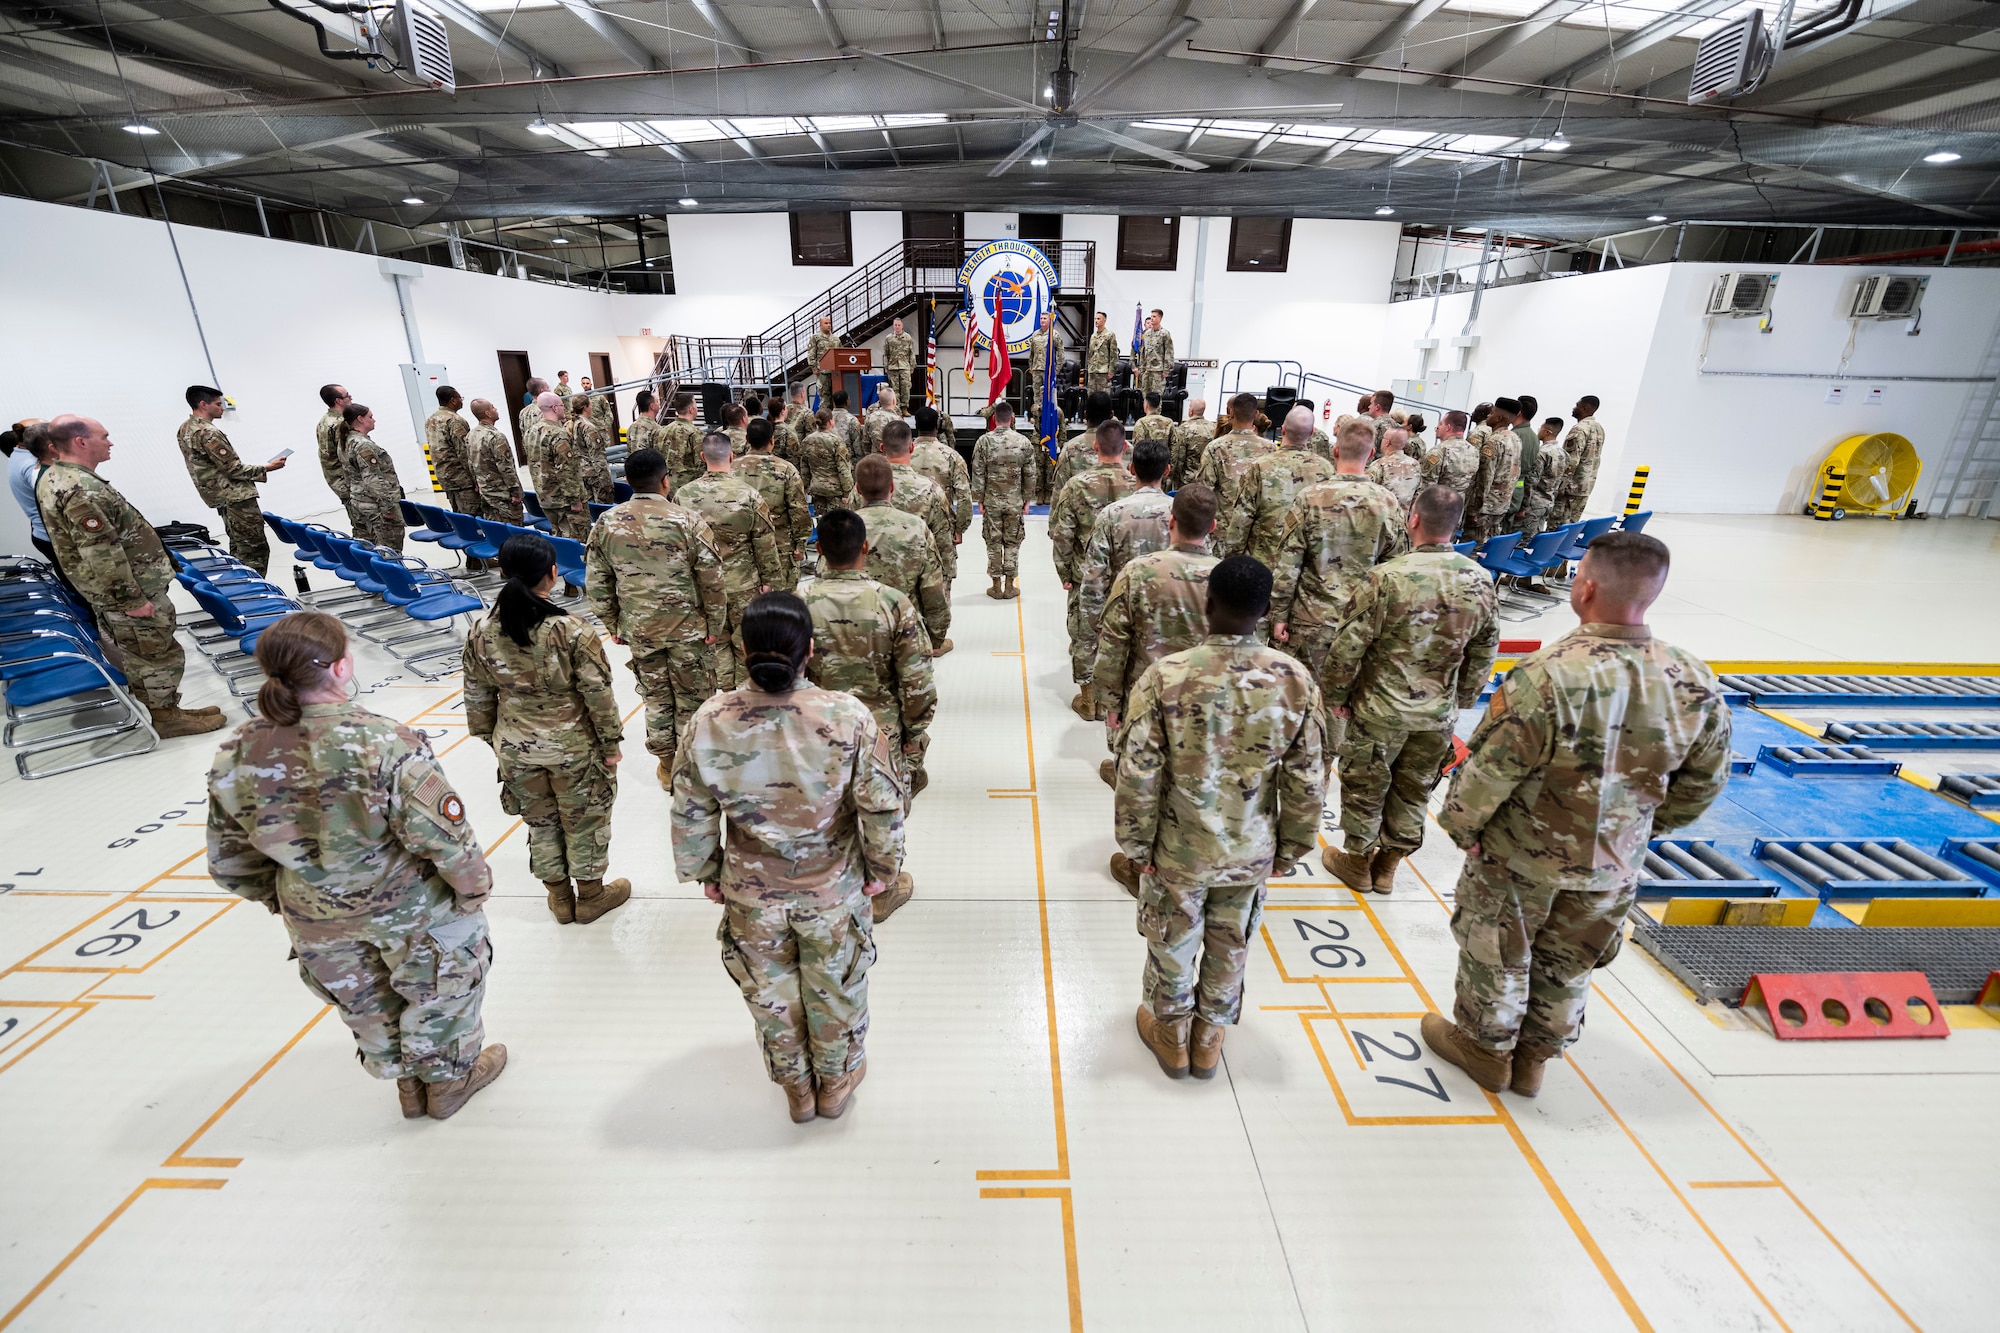 During the ceremony, Lt. Col. Jared Thompson relinquished command to Col. Dawson Brumbelow, 521st Air Mobility Operations Group commander, who then charged Lt. Col. Matthew Bryan with leading the squadron. The change of command ceremony is a long-standing military tradition that represents the formal transfer of responsibility from one officer to another.